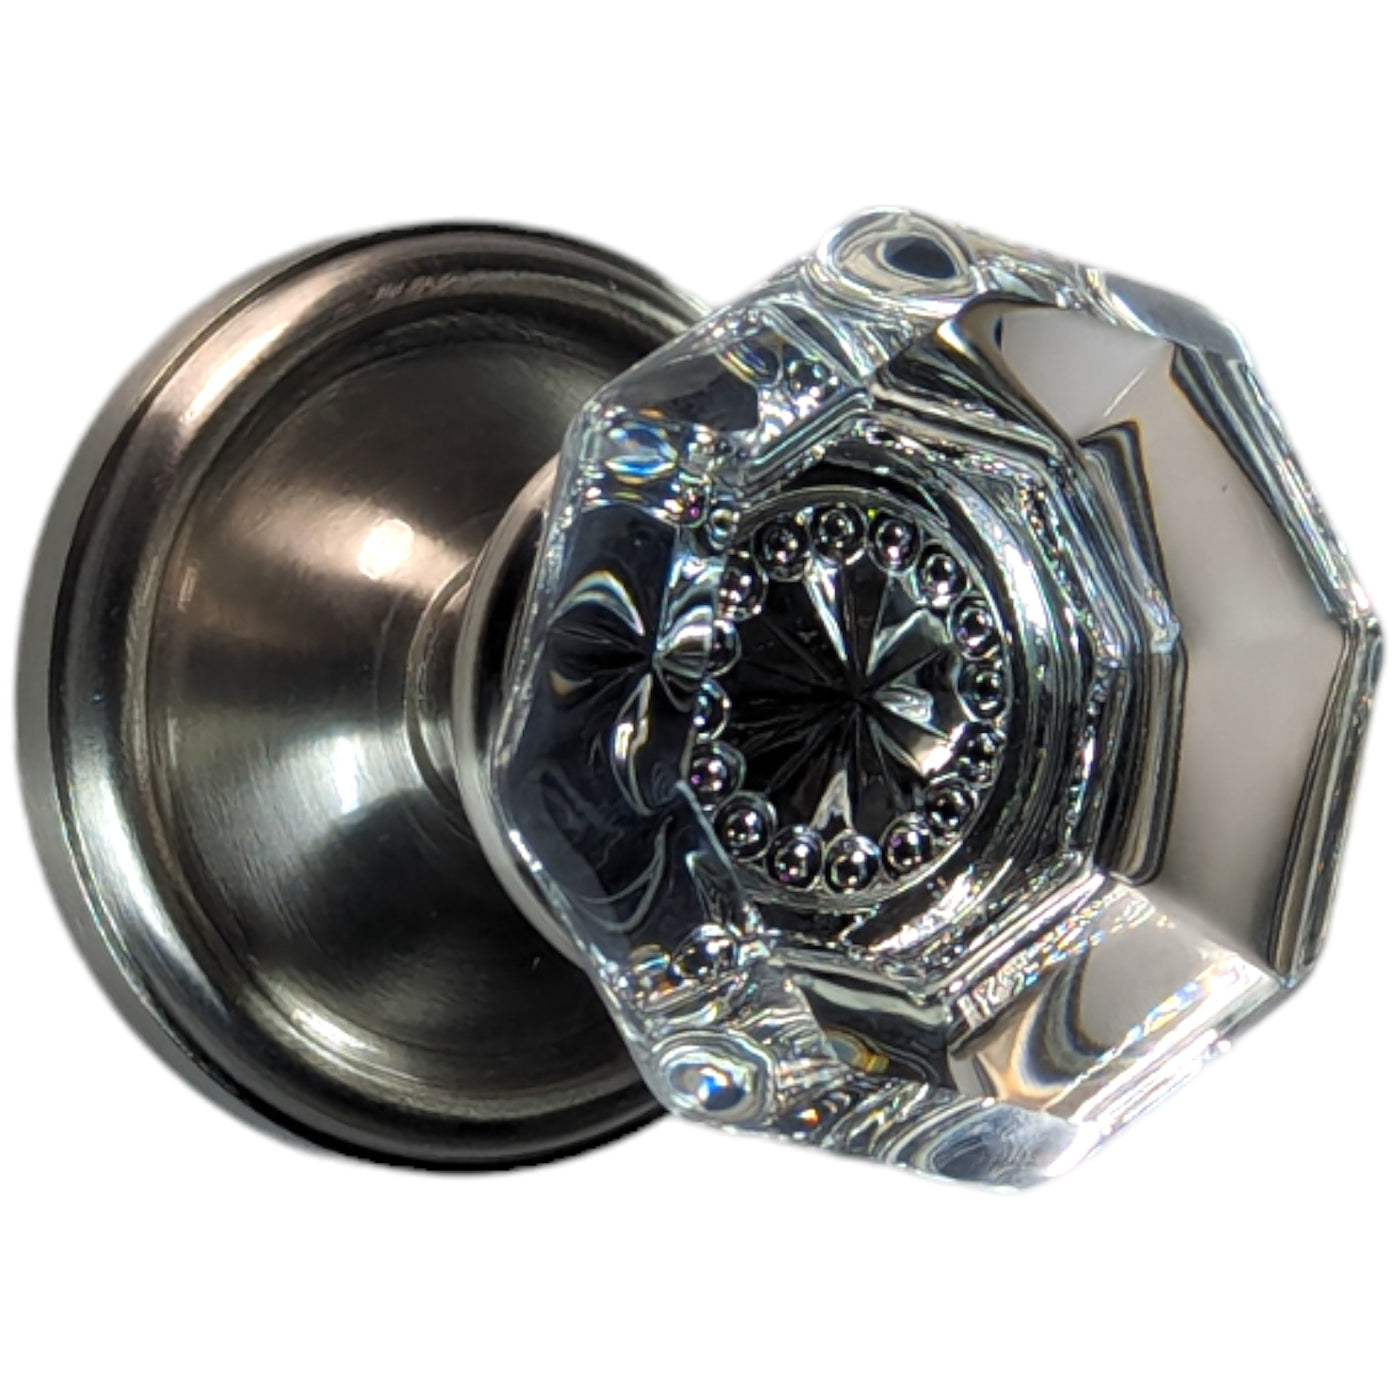 Traditional Rosette Door Set with Octagon Crystal Door Knobs (Several Finishes Available)